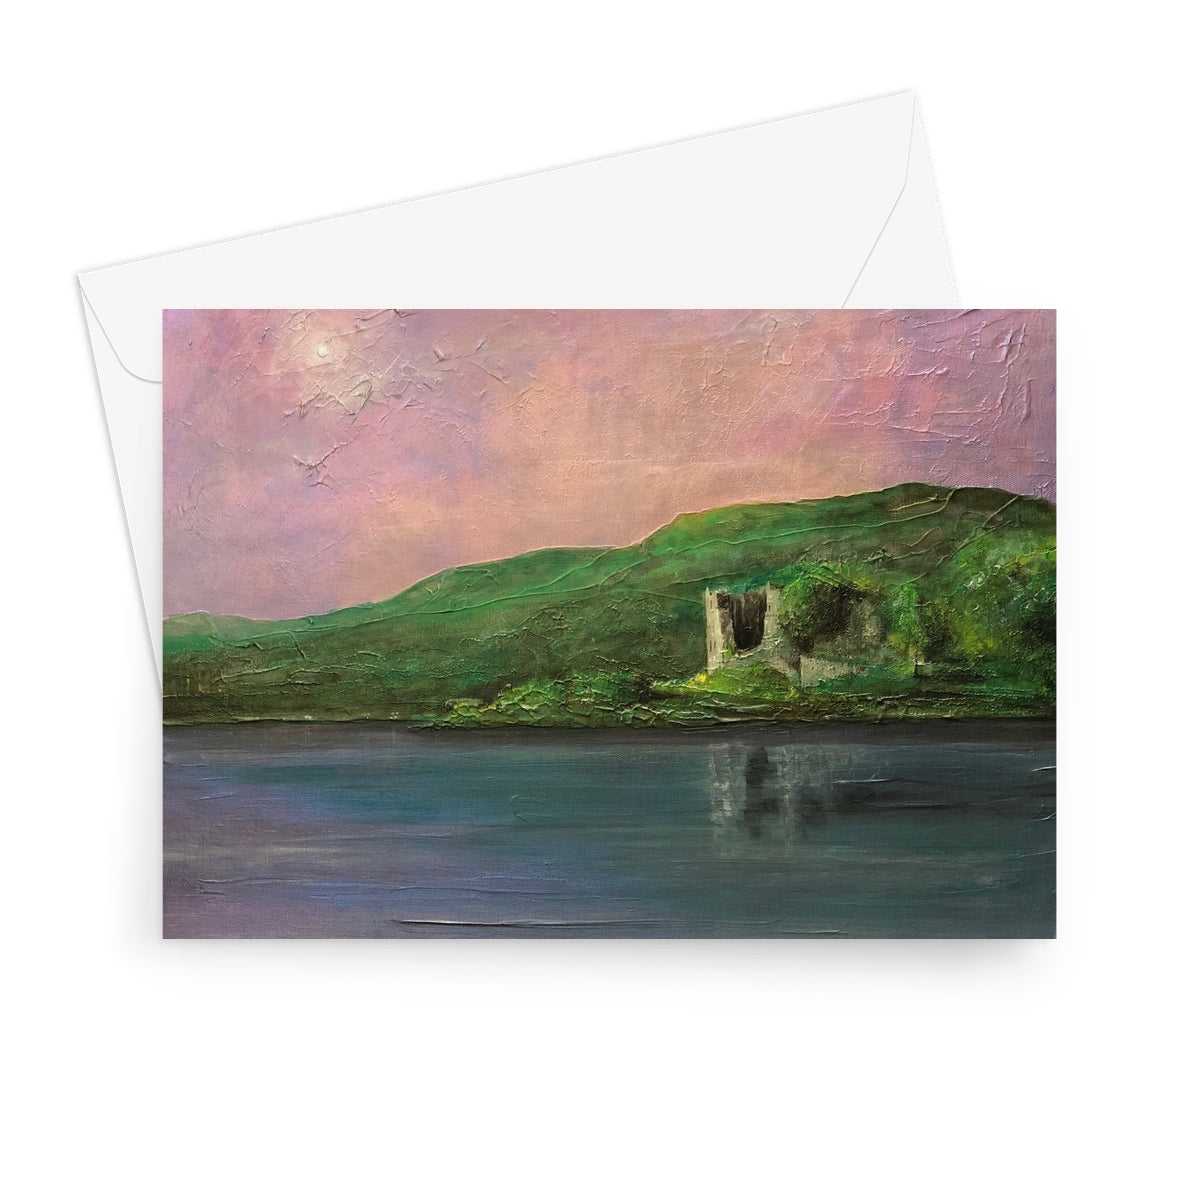 Old Castle Lachlan Art Gifts Greeting Card-Stationery-Prodigi-7"x5"-1 Card-Paintings, Prints, Homeware, Art Gifts From Scotland By Scottish Artist Kevin Hunter